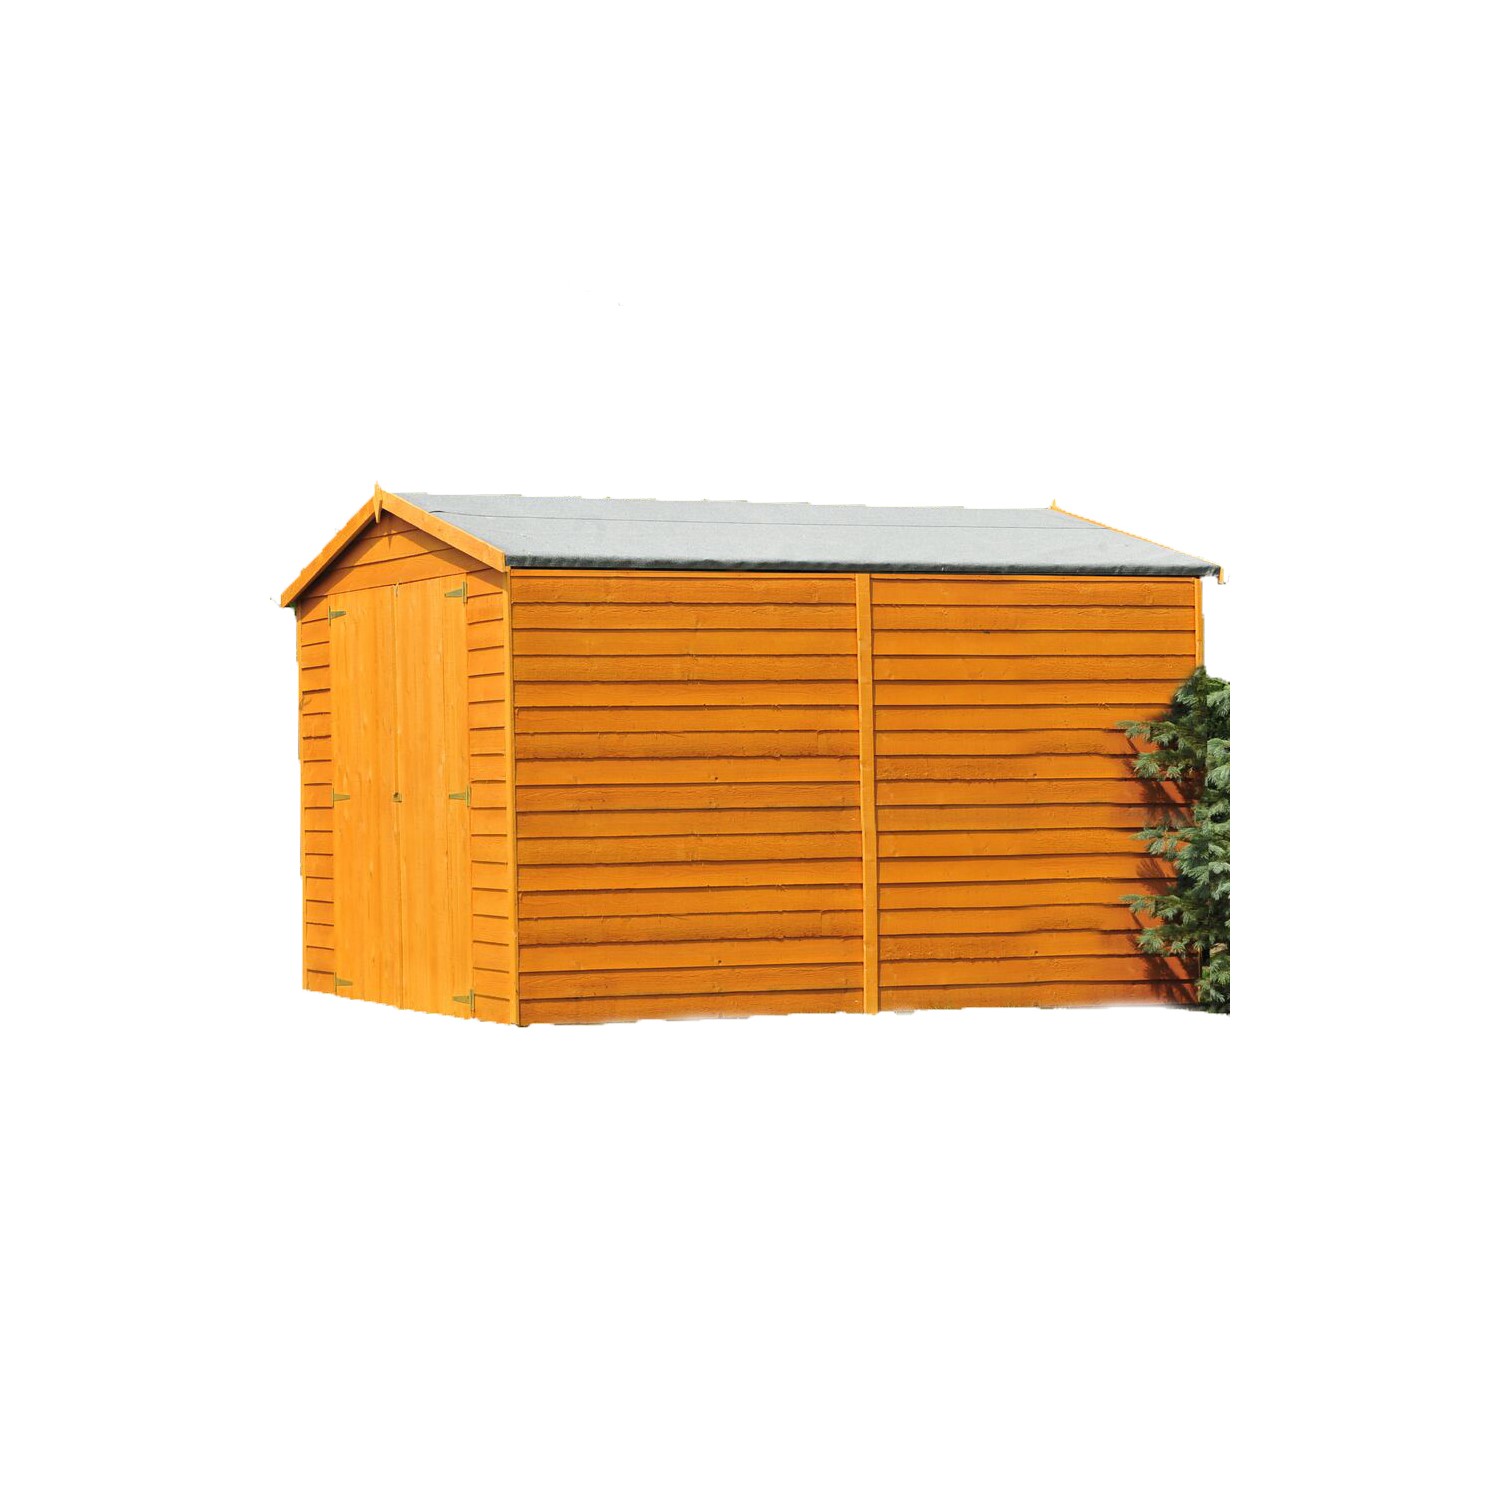 Read more about Shire overlap apex garden shed with double doors 12 x 6ft